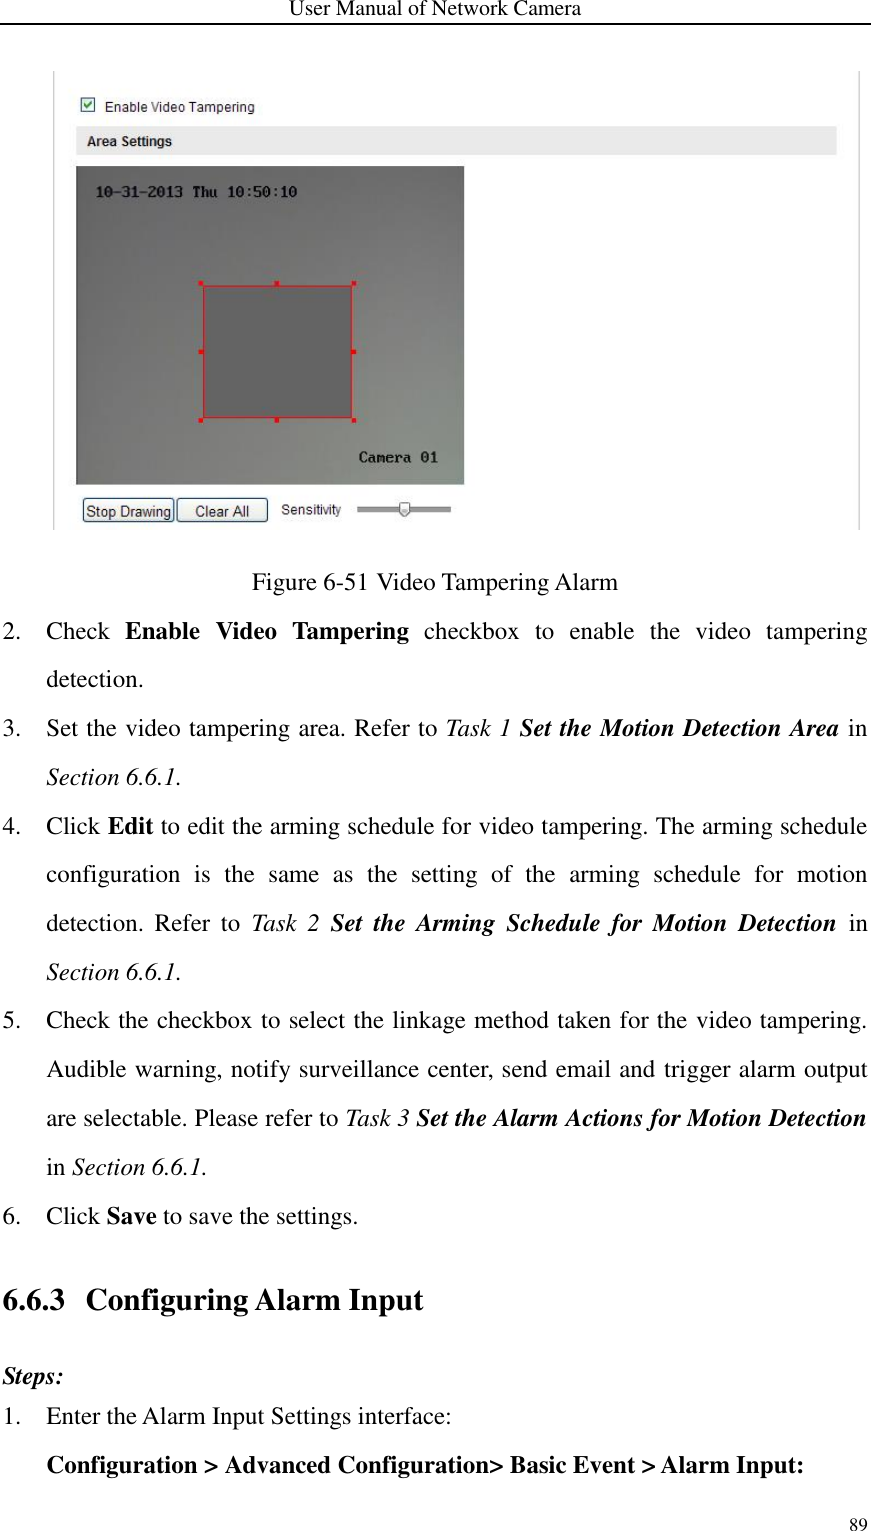 User Manual of Network Camera 89   Figure 6-51 Video Tampering Alarm 2. Check  Enable  Video  Tampering  checkbox  to  enable  the  video  tampering detection. 3. Set the video tampering area. Refer to Task 1 Set the Motion Detection Area in Section 6.6.1. 4. Click Edit to edit the arming schedule for video tampering. The arming schedule configuration  is  the  same  as  the  setting  of  the  arming  schedule  for  motion detection.  Refer  to  Task  2  Set  the  Arming  Schedule  for  Motion  Detection in Section 6.6.1. 5. Check the checkbox to select the linkage method taken for the video tampering. Audible warning, notify surveillance center, send email and trigger alarm output are selectable. Please refer to Task 3 Set the Alarm Actions for Motion Detection in Section 6.6.1. 6. Click Save to save the settings. 6.6.3 Configuring Alarm Input Steps: 1. Enter the Alarm Input Settings interface: Configuration &gt; Advanced Configuration&gt; Basic Event &gt; Alarm Input: 